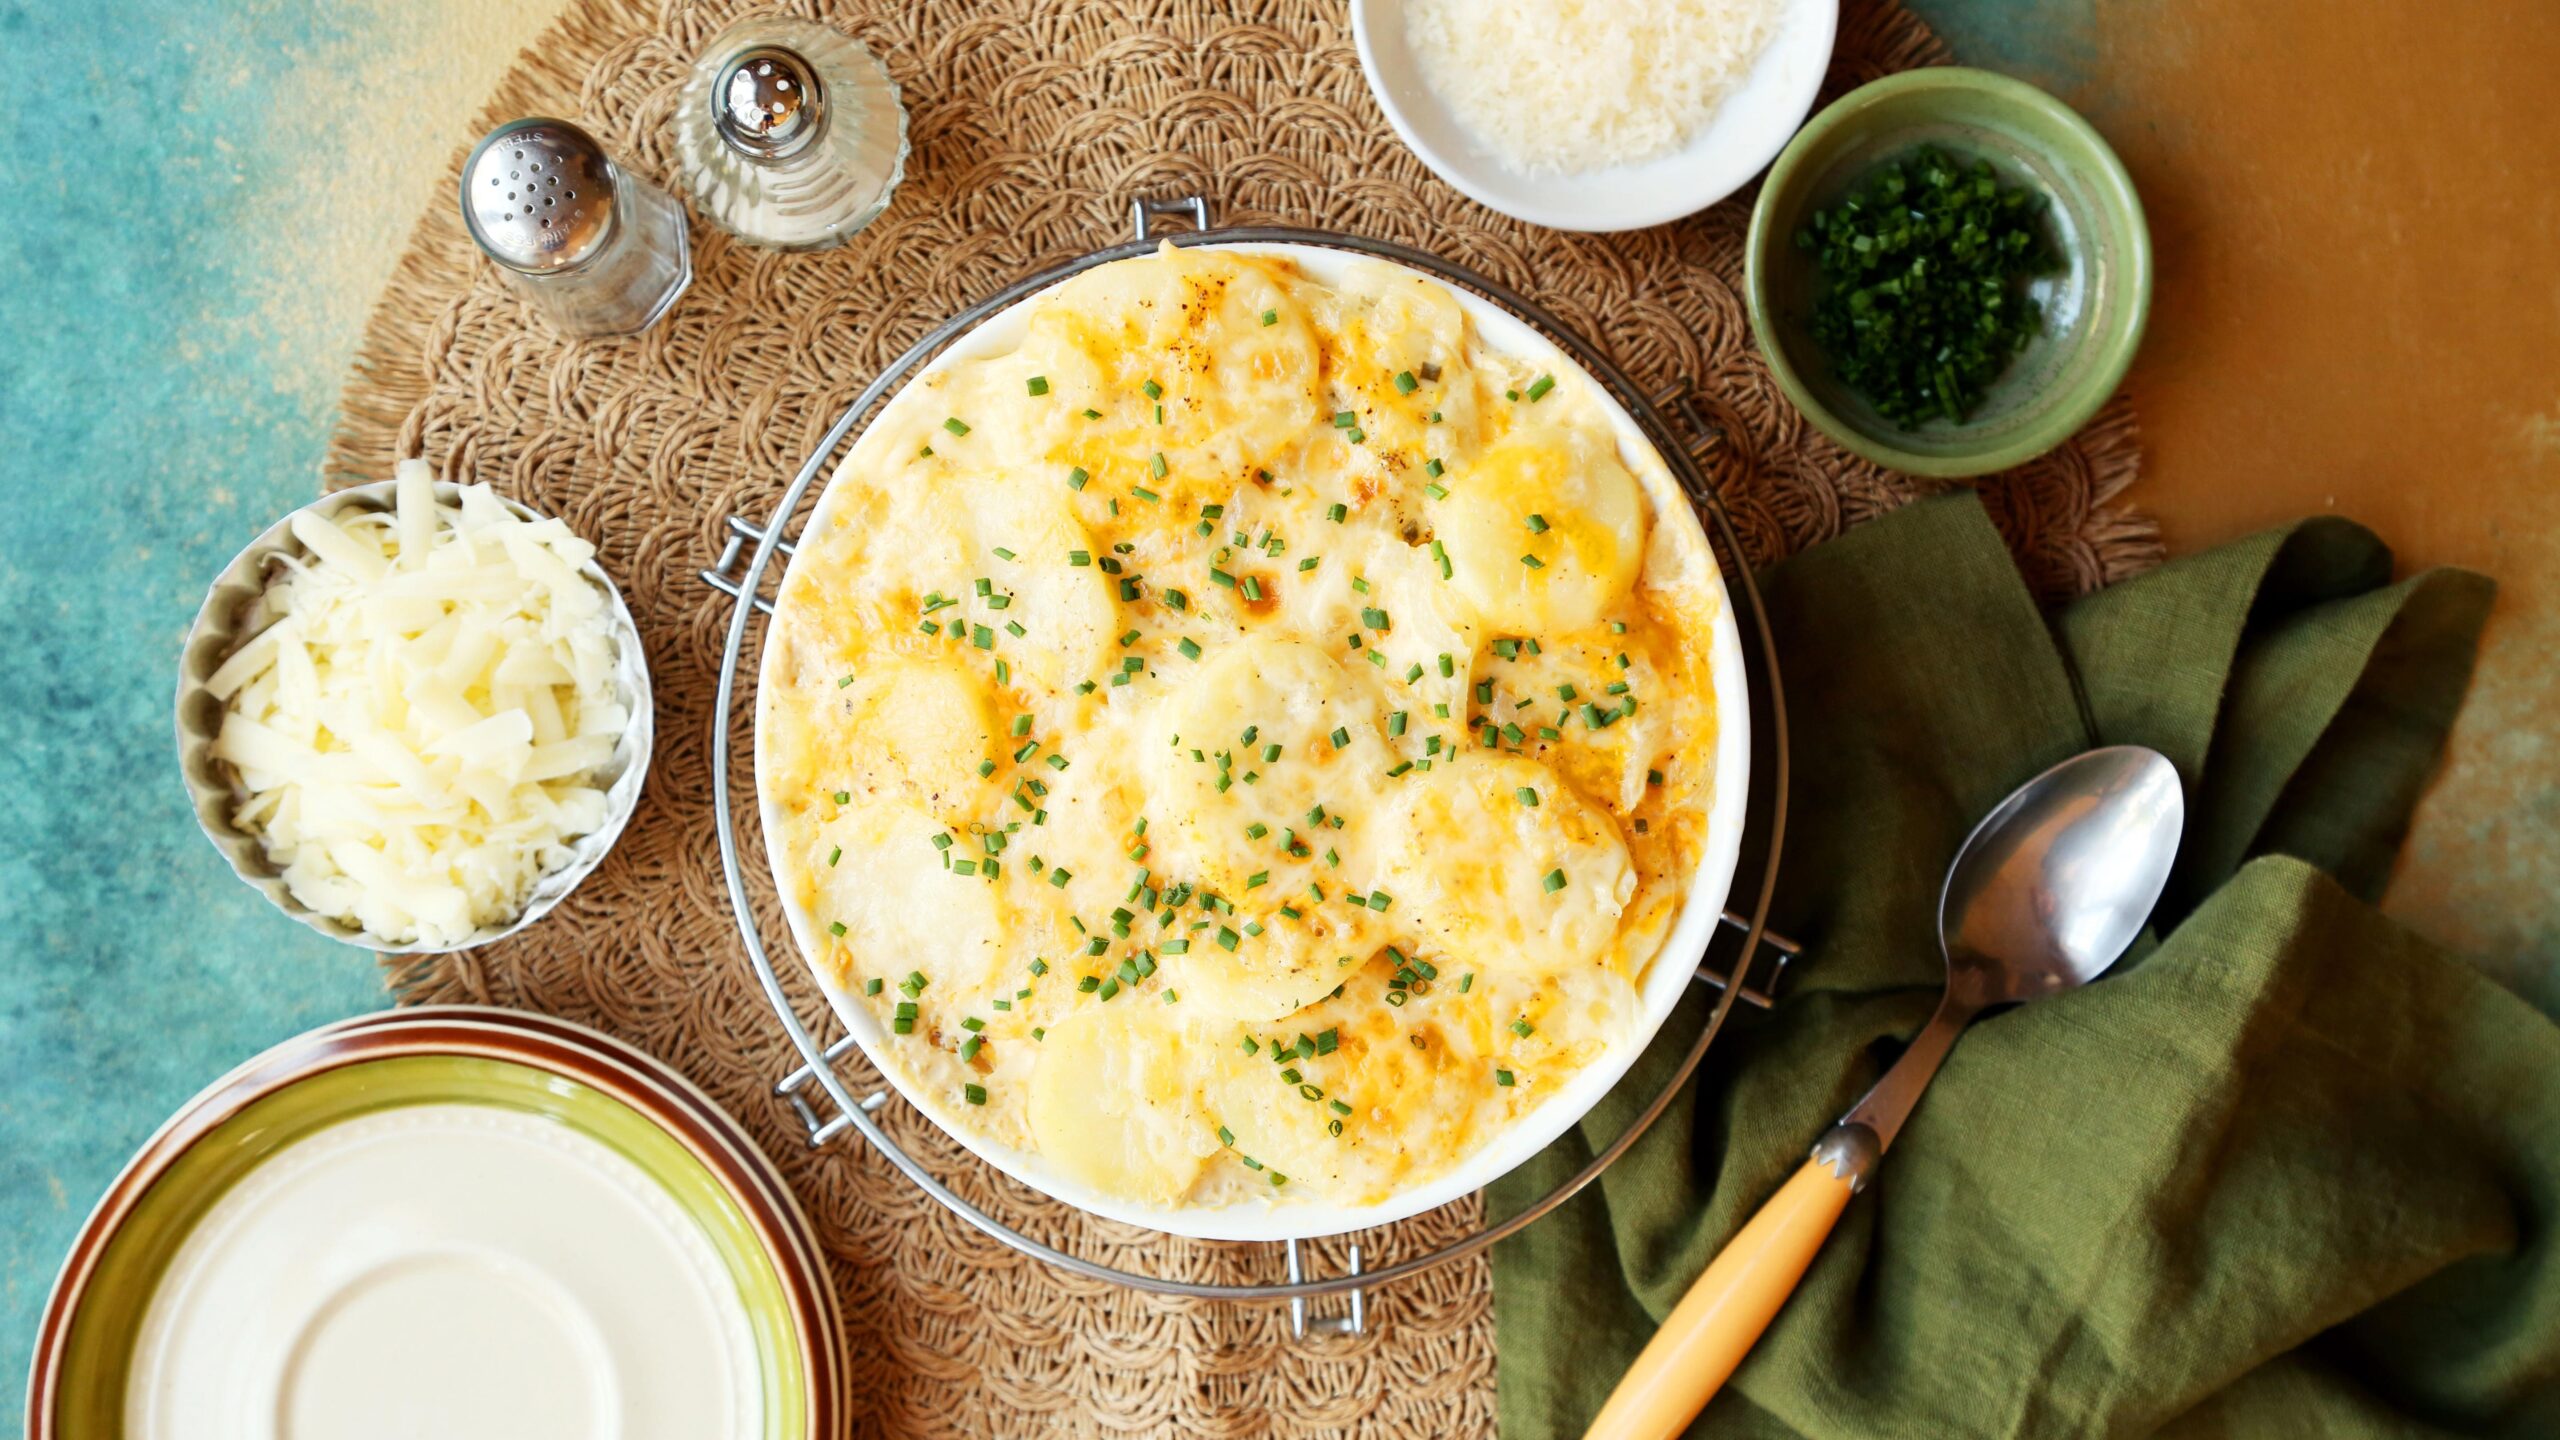  A perfect side dish for any occasion, Potatoes Au Gratin never tasted so good!